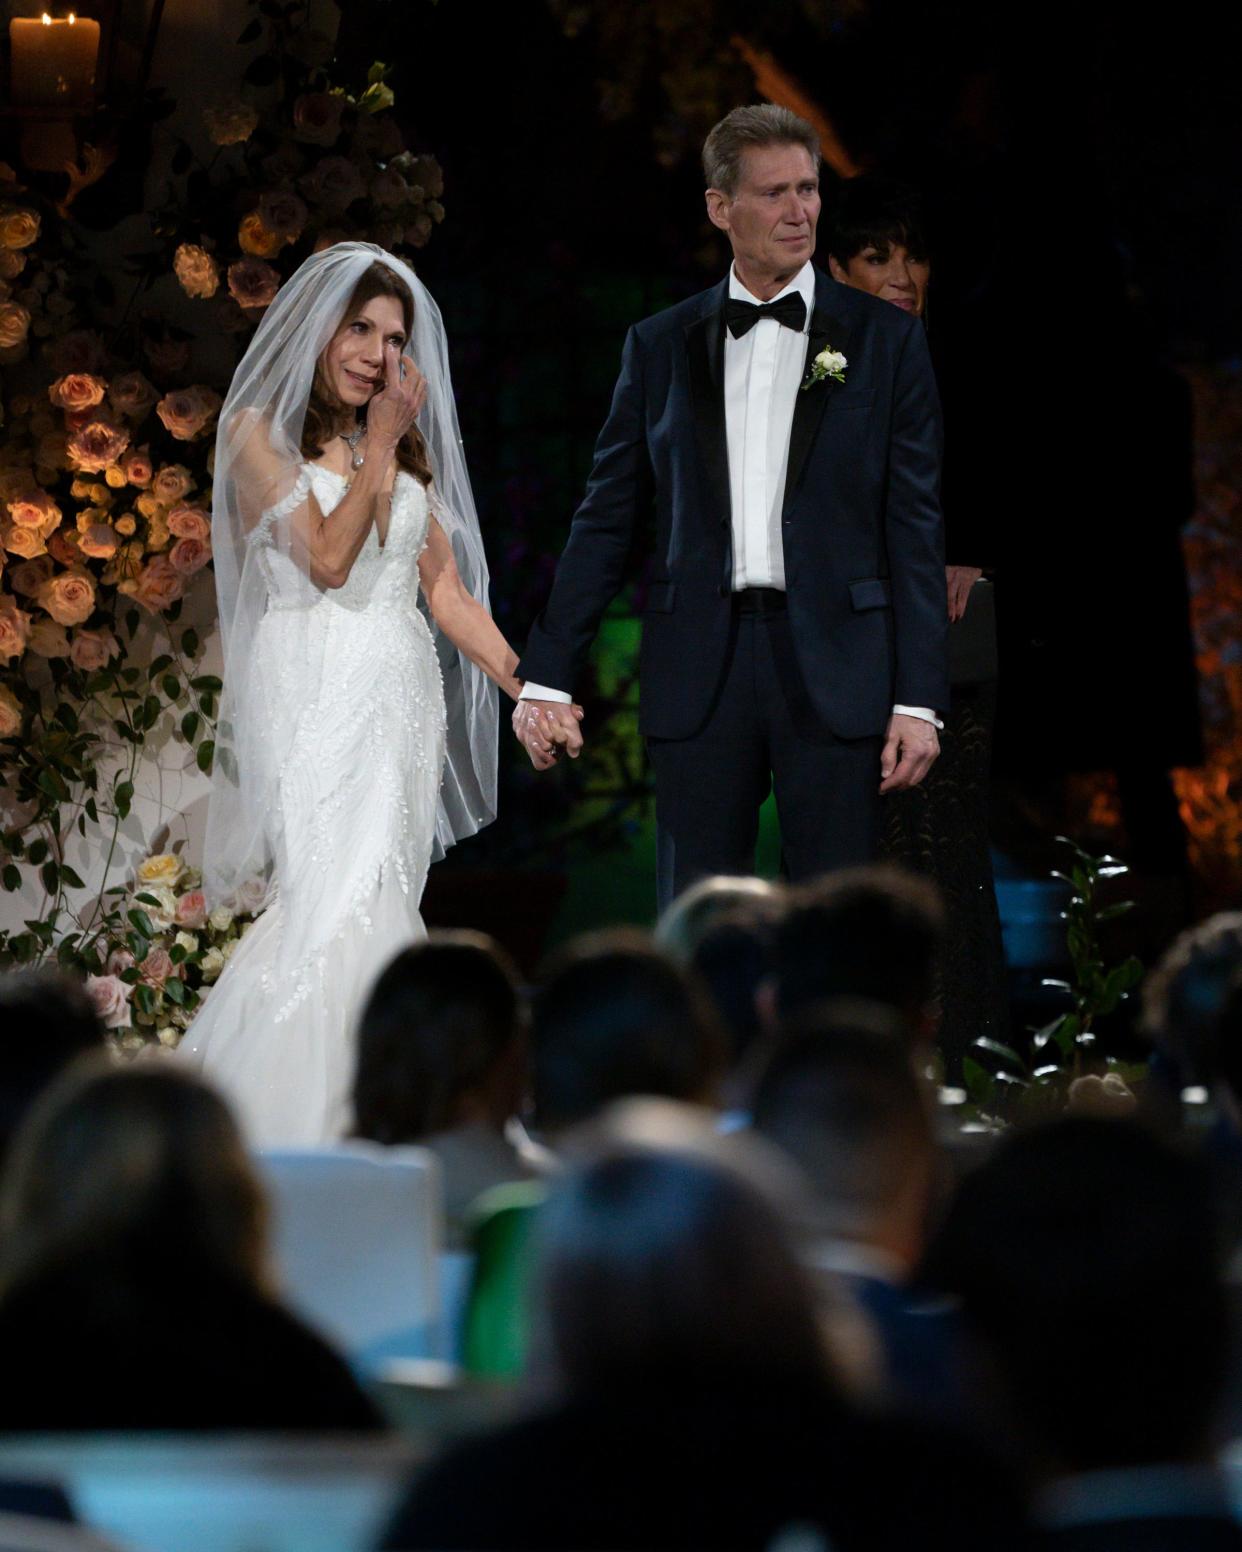 Theresa Nist and Gerry Turner were emotional during their wedding ceremony in Palm Springs, California, on Jan. 4, 2024.